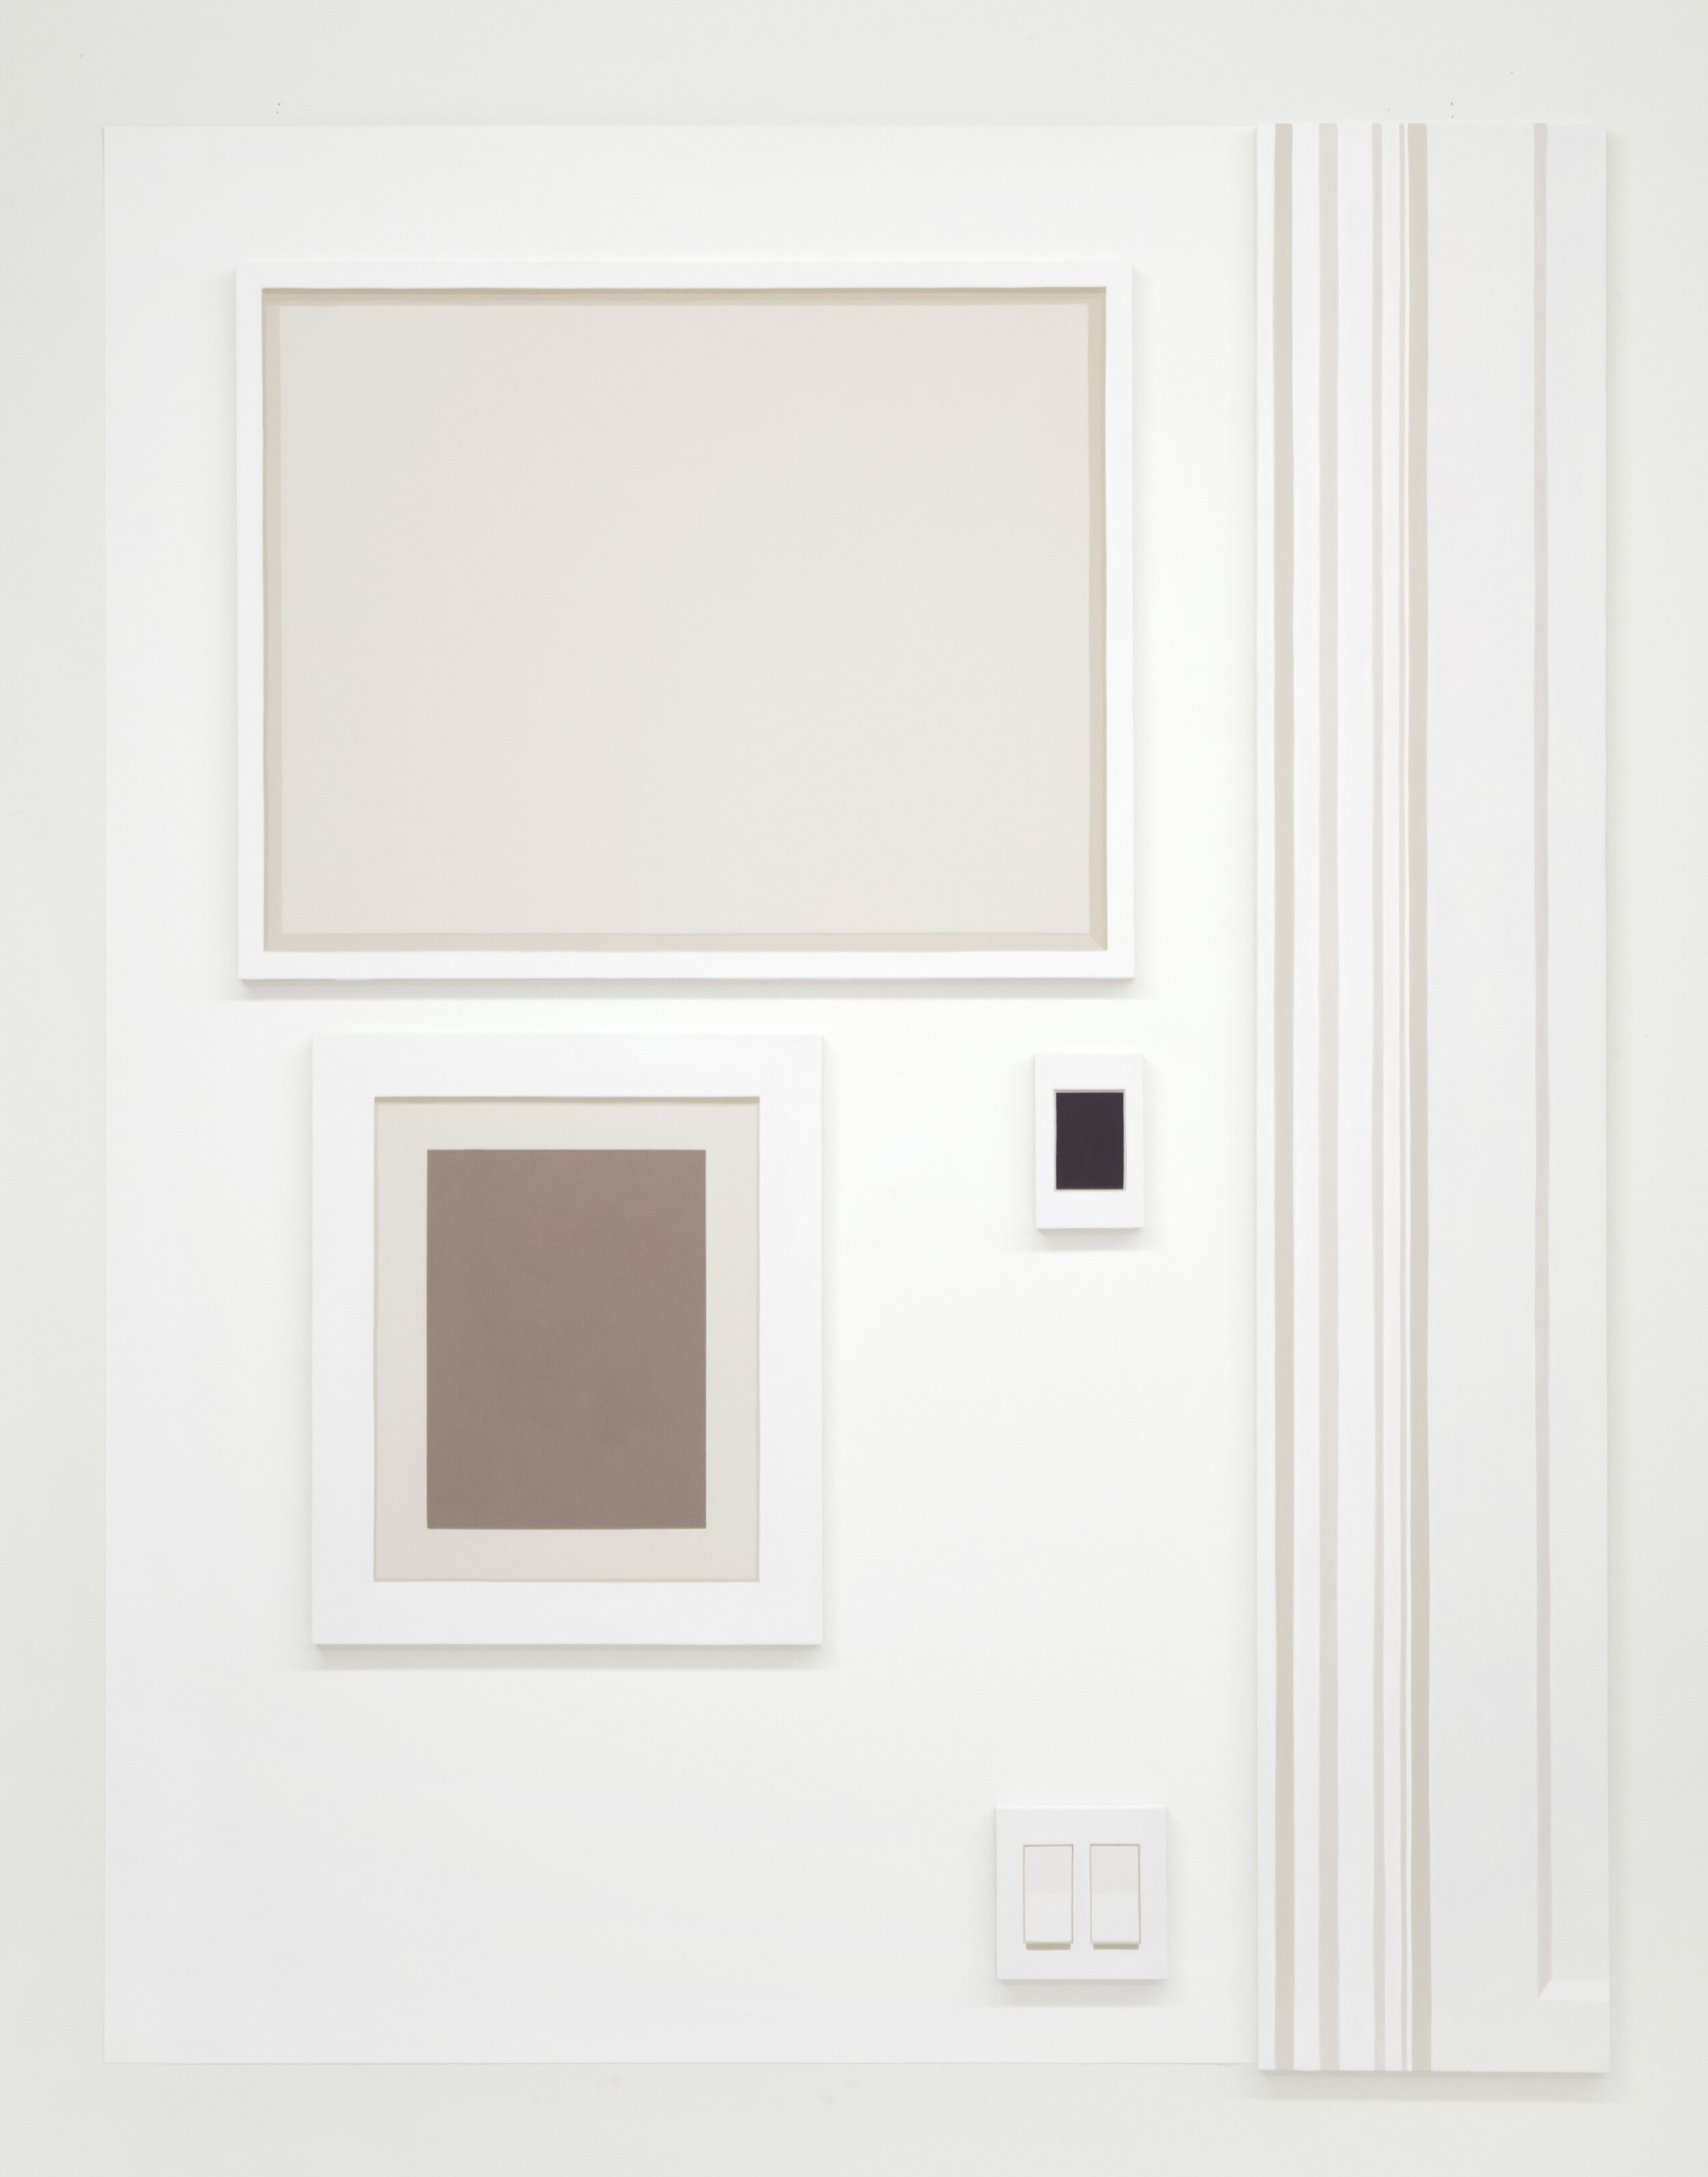   Self Portrait No. 2  2019, 54.75” h x 42.75” w x 3/4” d (overall).  Five Paintings: Oil on linen over panel. Various sizes.  Wall: Benjamin Moore Super White #N215-02. 